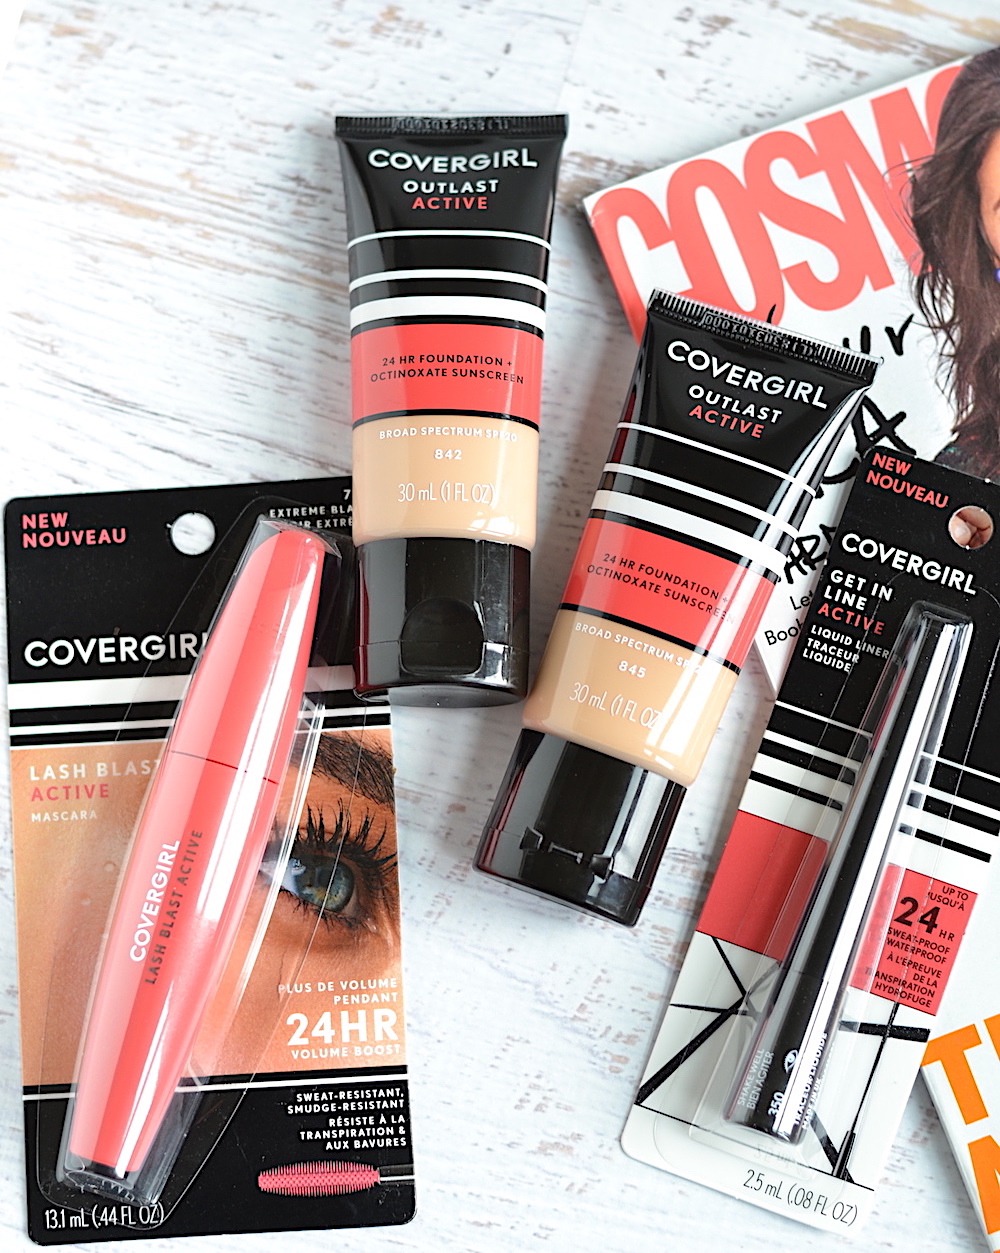 New CoverGirl Active Makeup collection